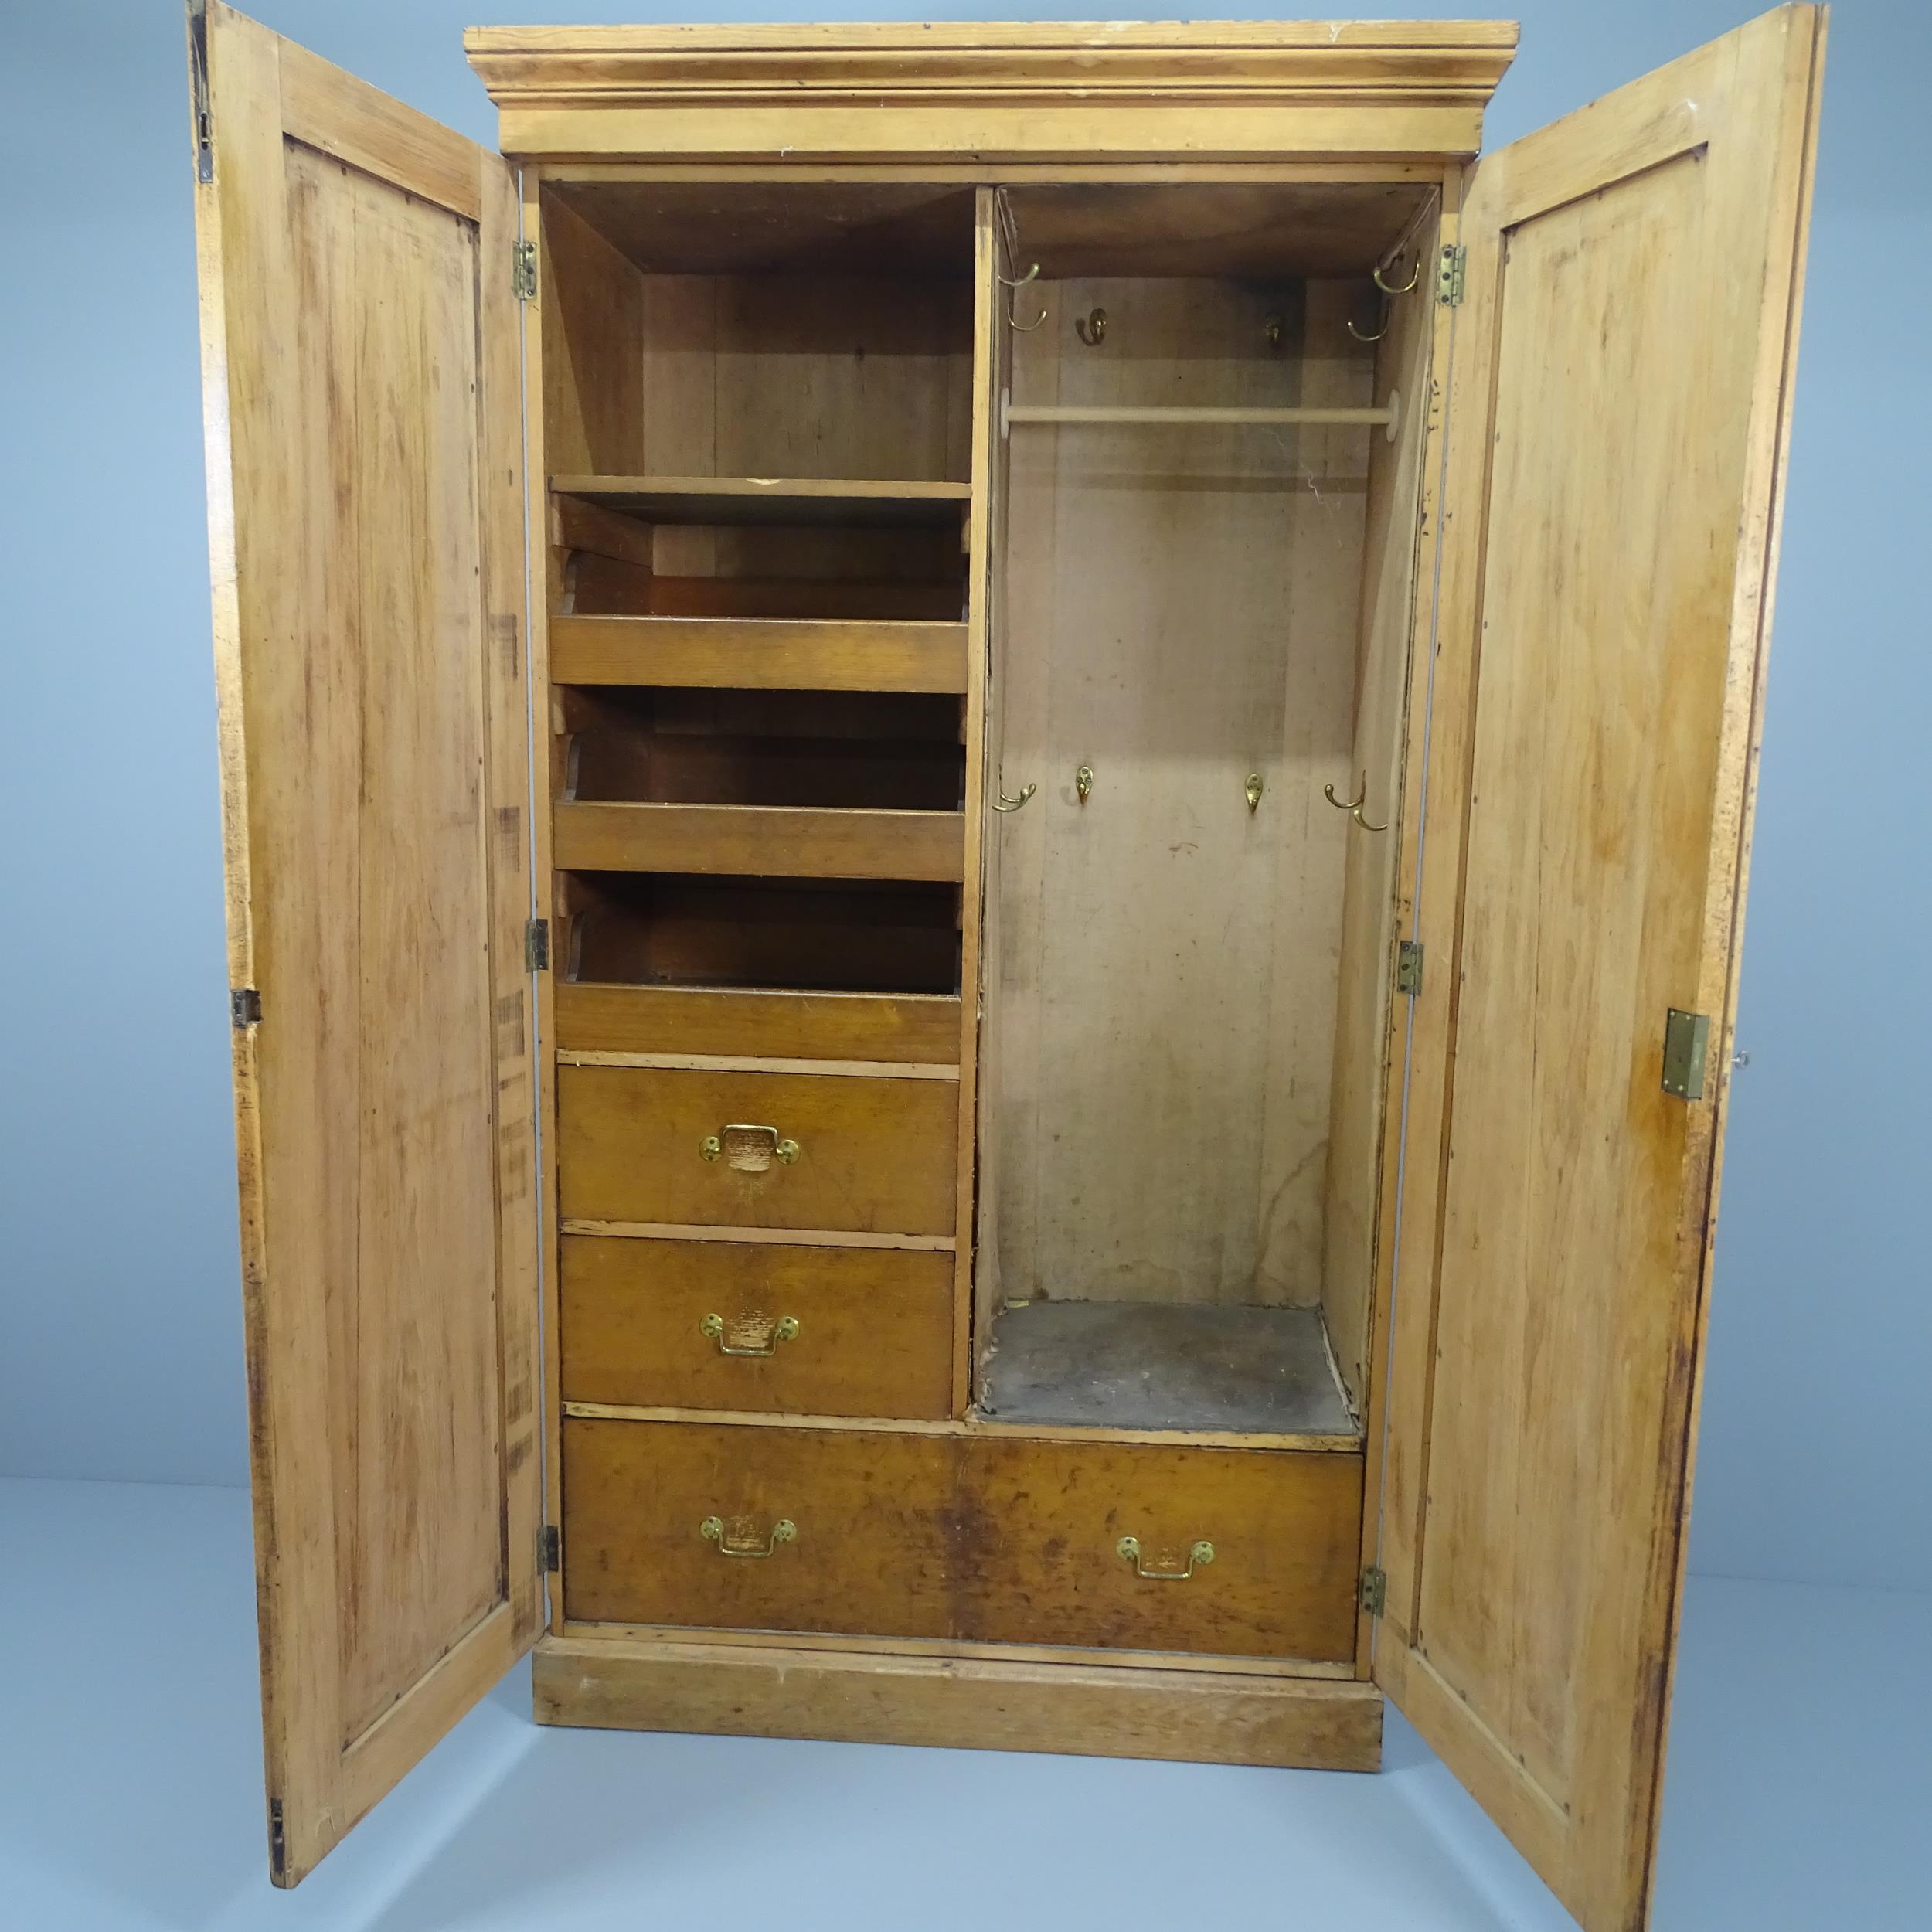 An antique pine two-door compactum wardrobe, with fitted interior. 116x206x57cm. - Image 2 of 2